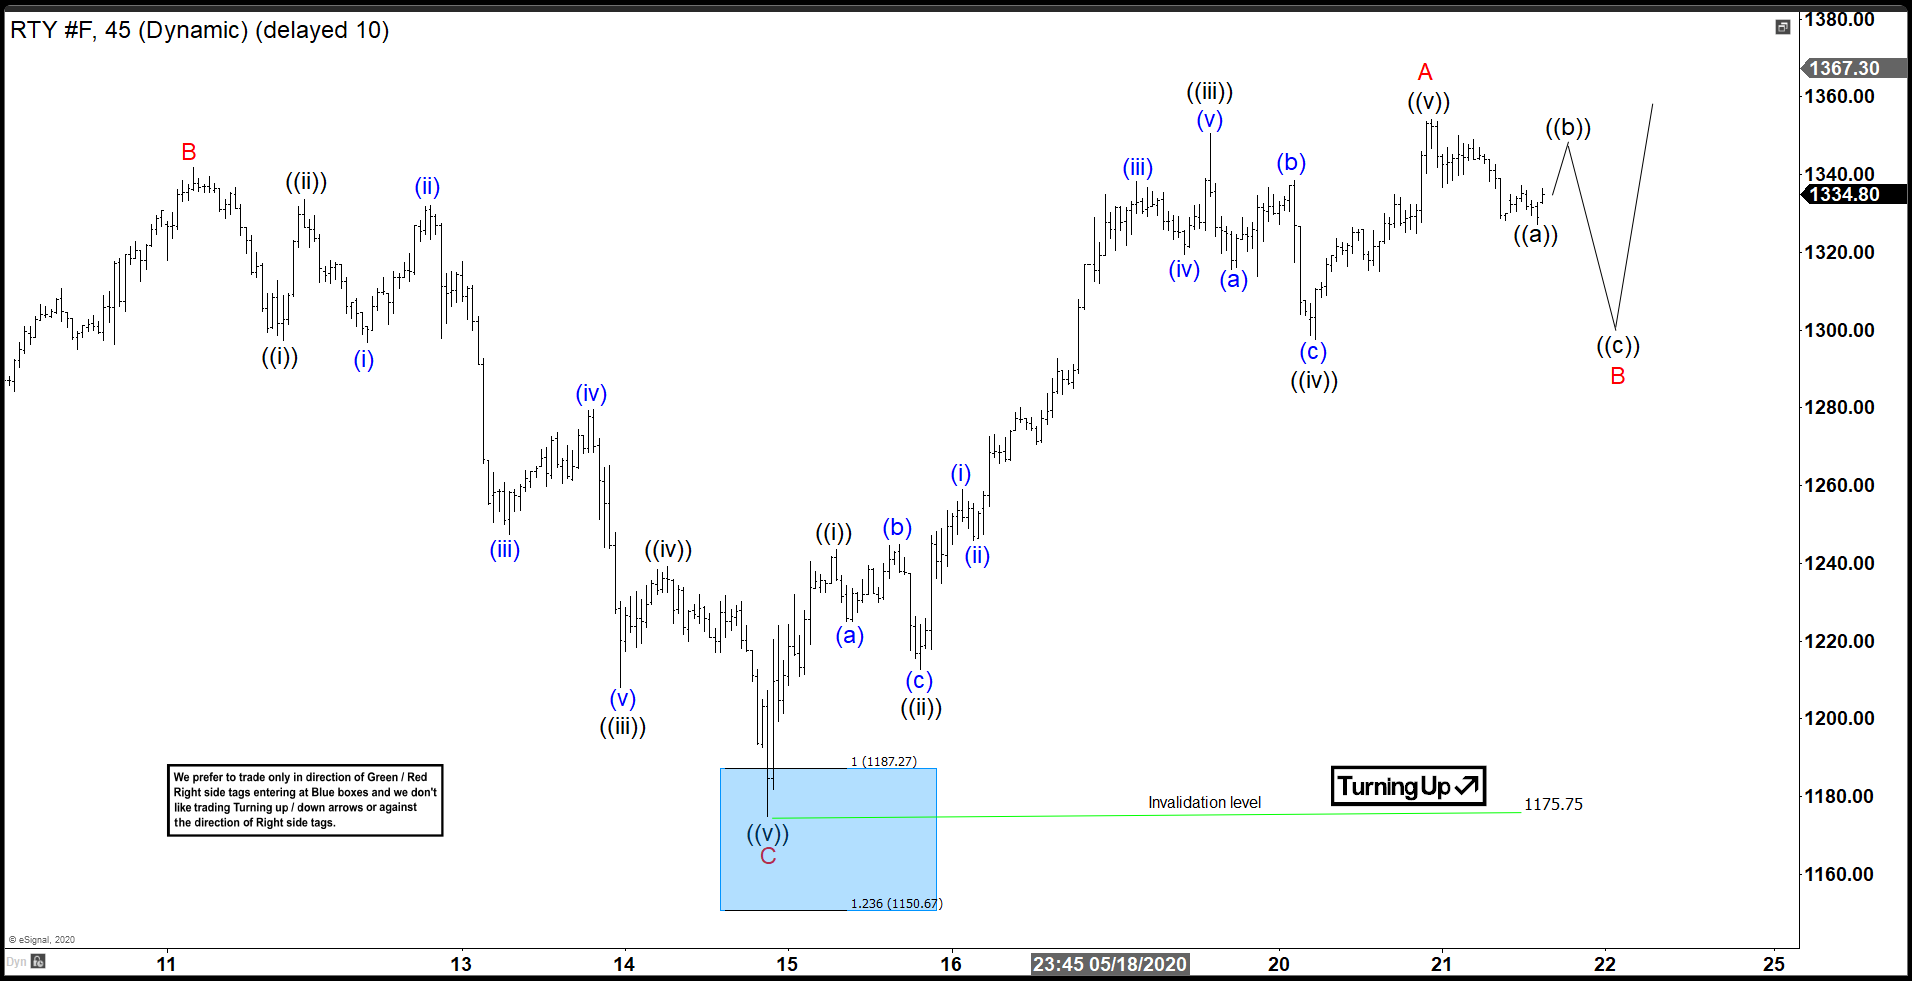 RTY_F (Russell 2000) Forecasting The Bounce From Blue Box